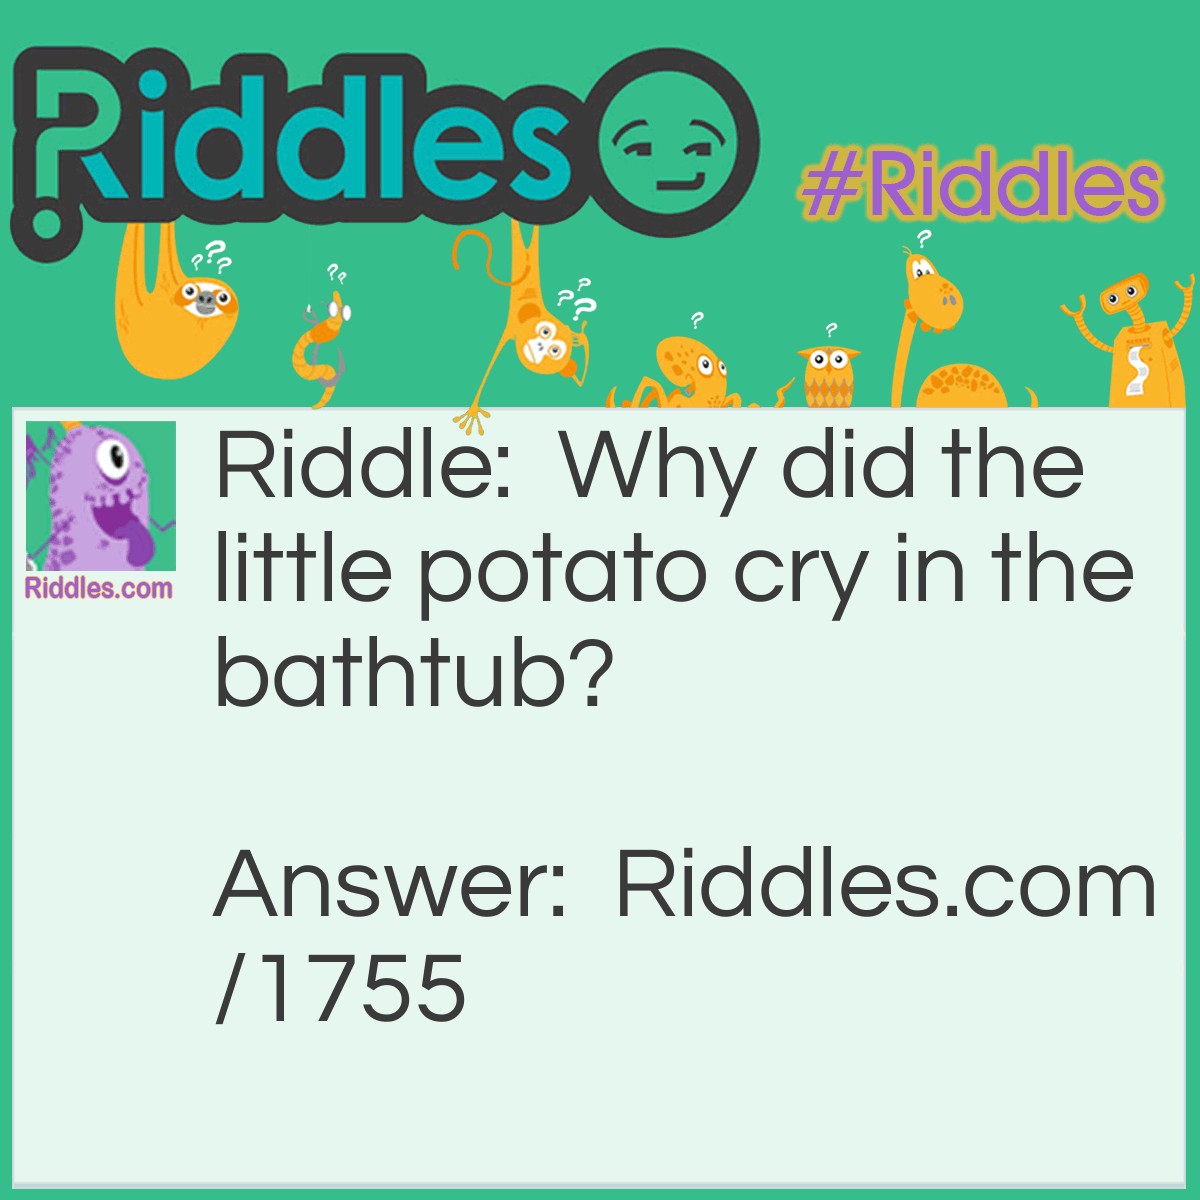 Riddle: Why did the little potato cry in the bathtub? Answer: It got soap in its eyes.